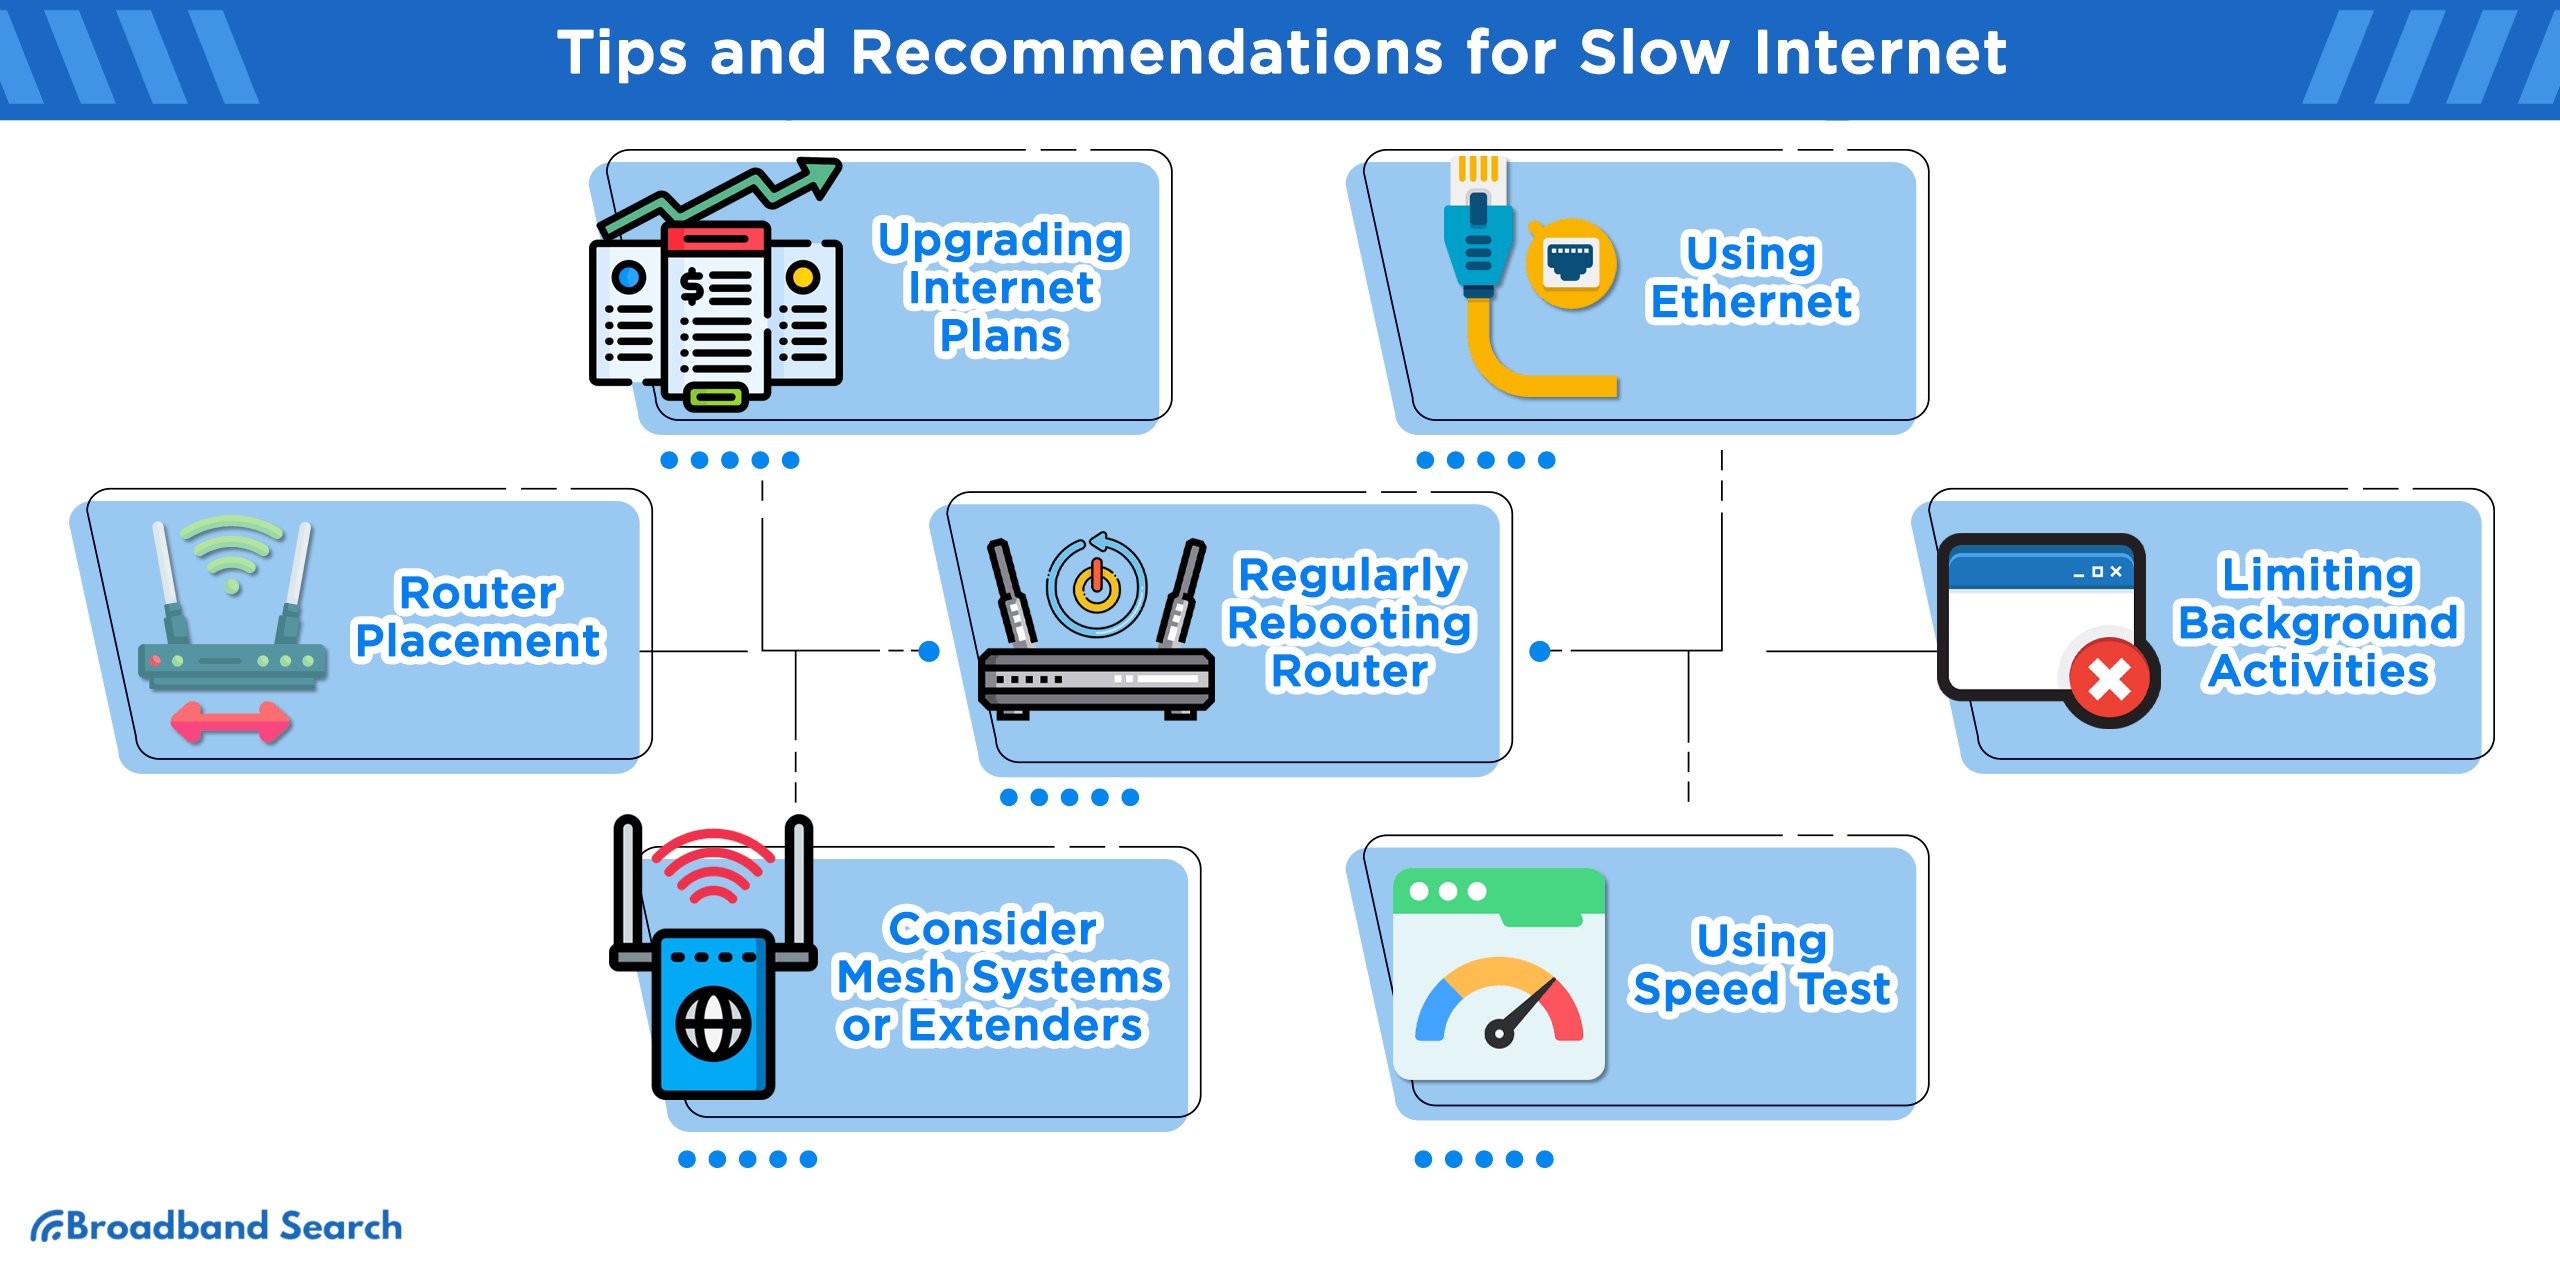 Tips and recommendations for slow internet